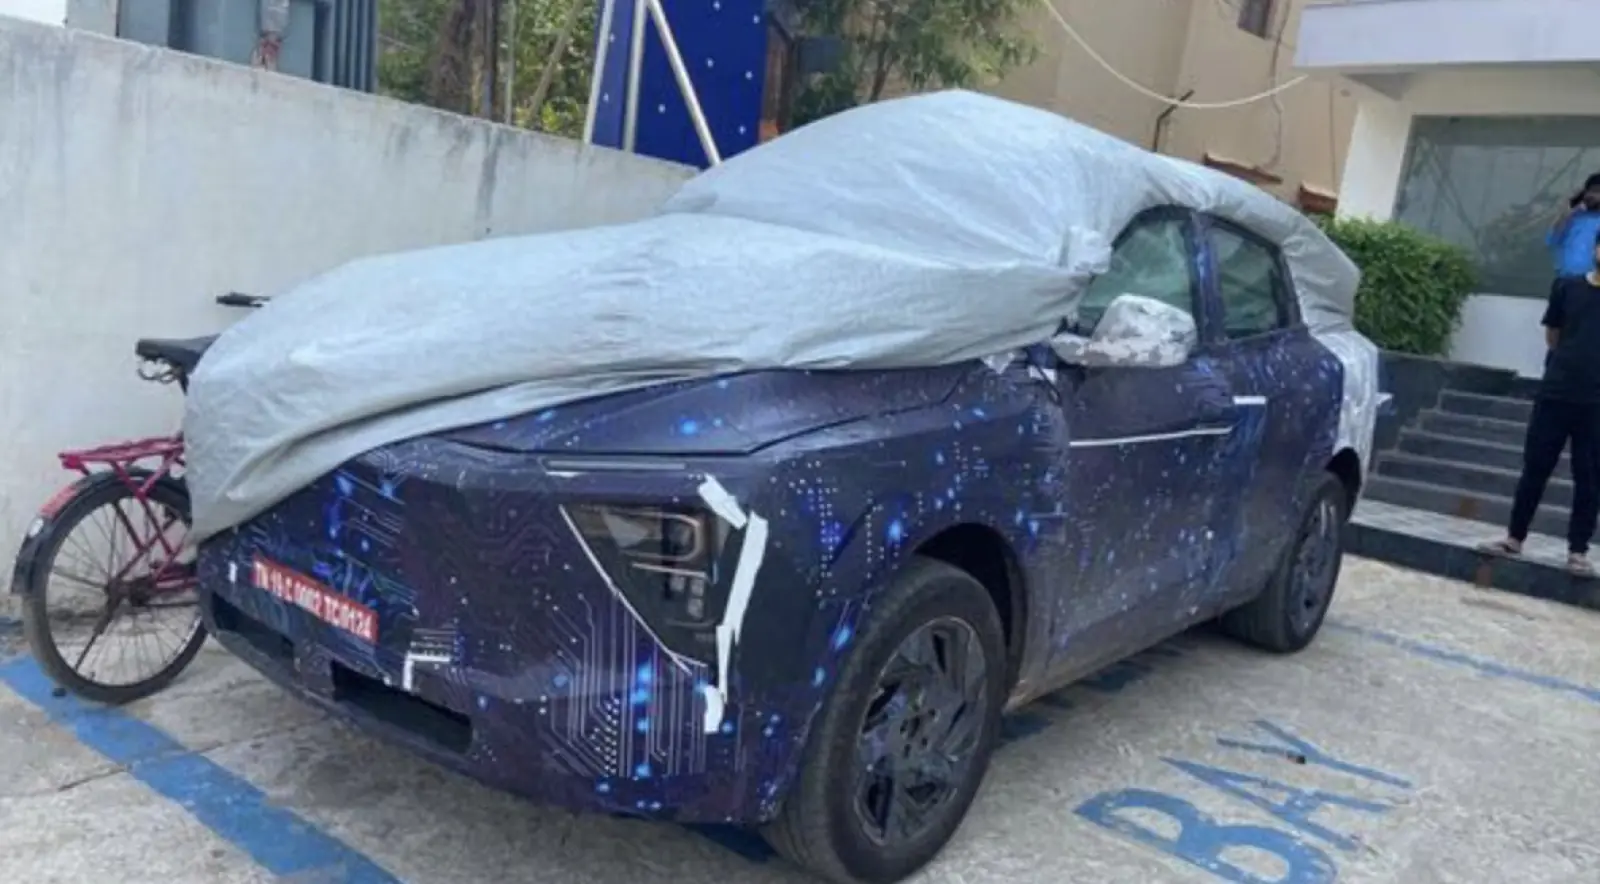 Mahindra XUV.e9 EV spotted while charging, new details revealed